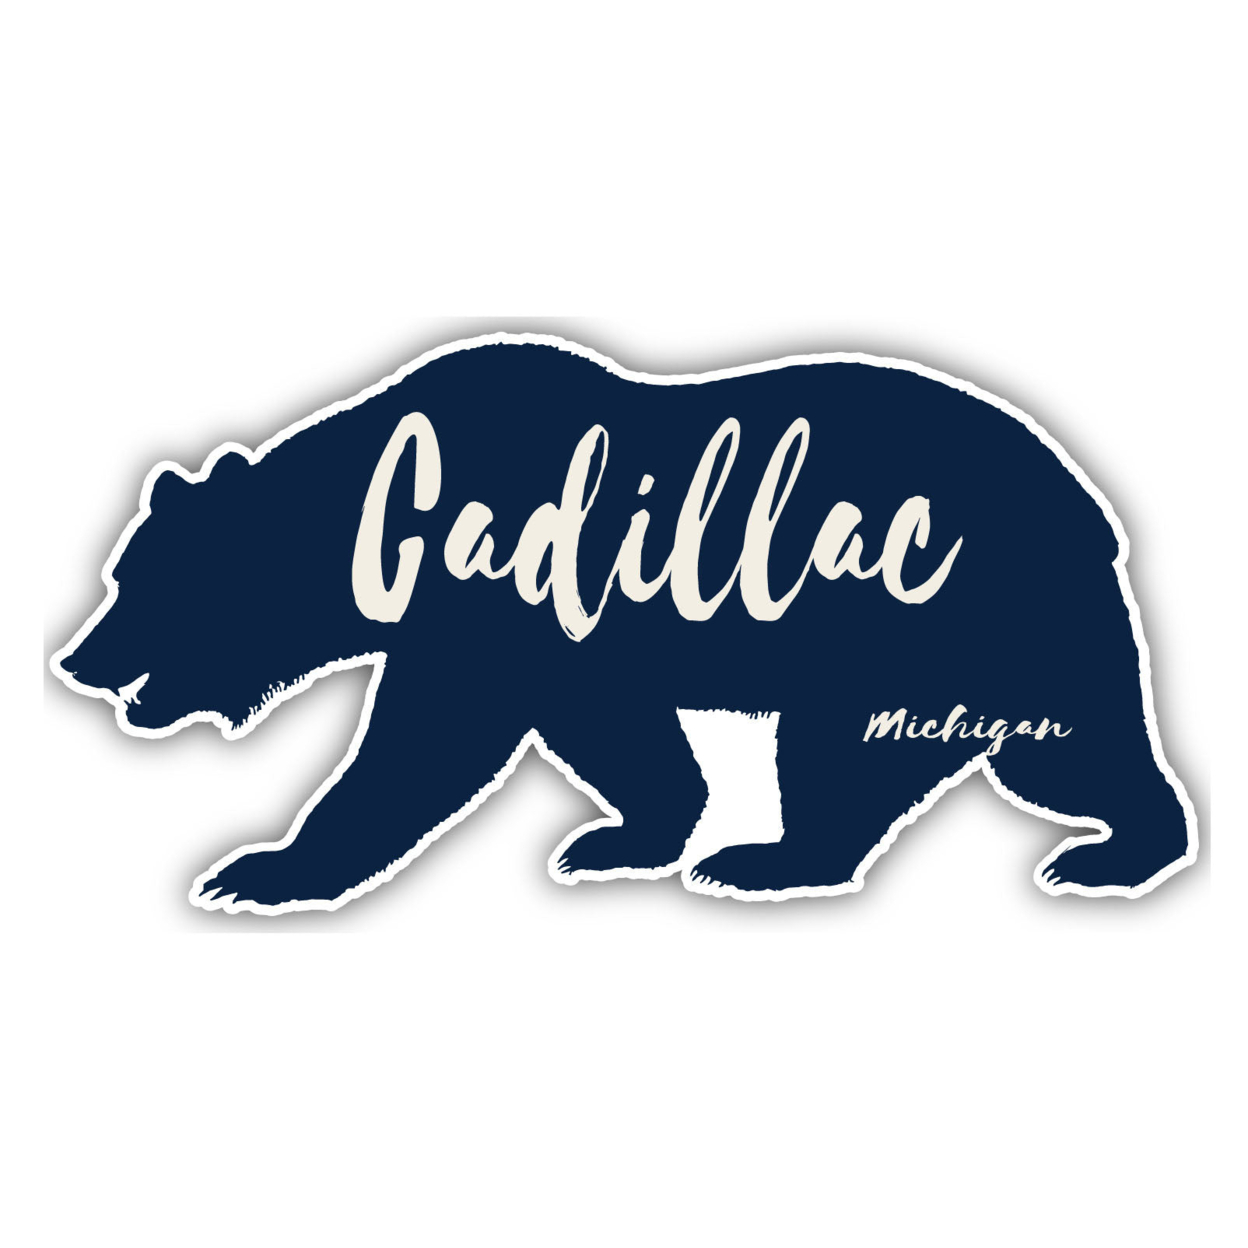 Cadillac Michigan Souvenir Decorative Stickers (Choose Theme And Size) - 4-Pack, 10-Inch, Great Outdoors